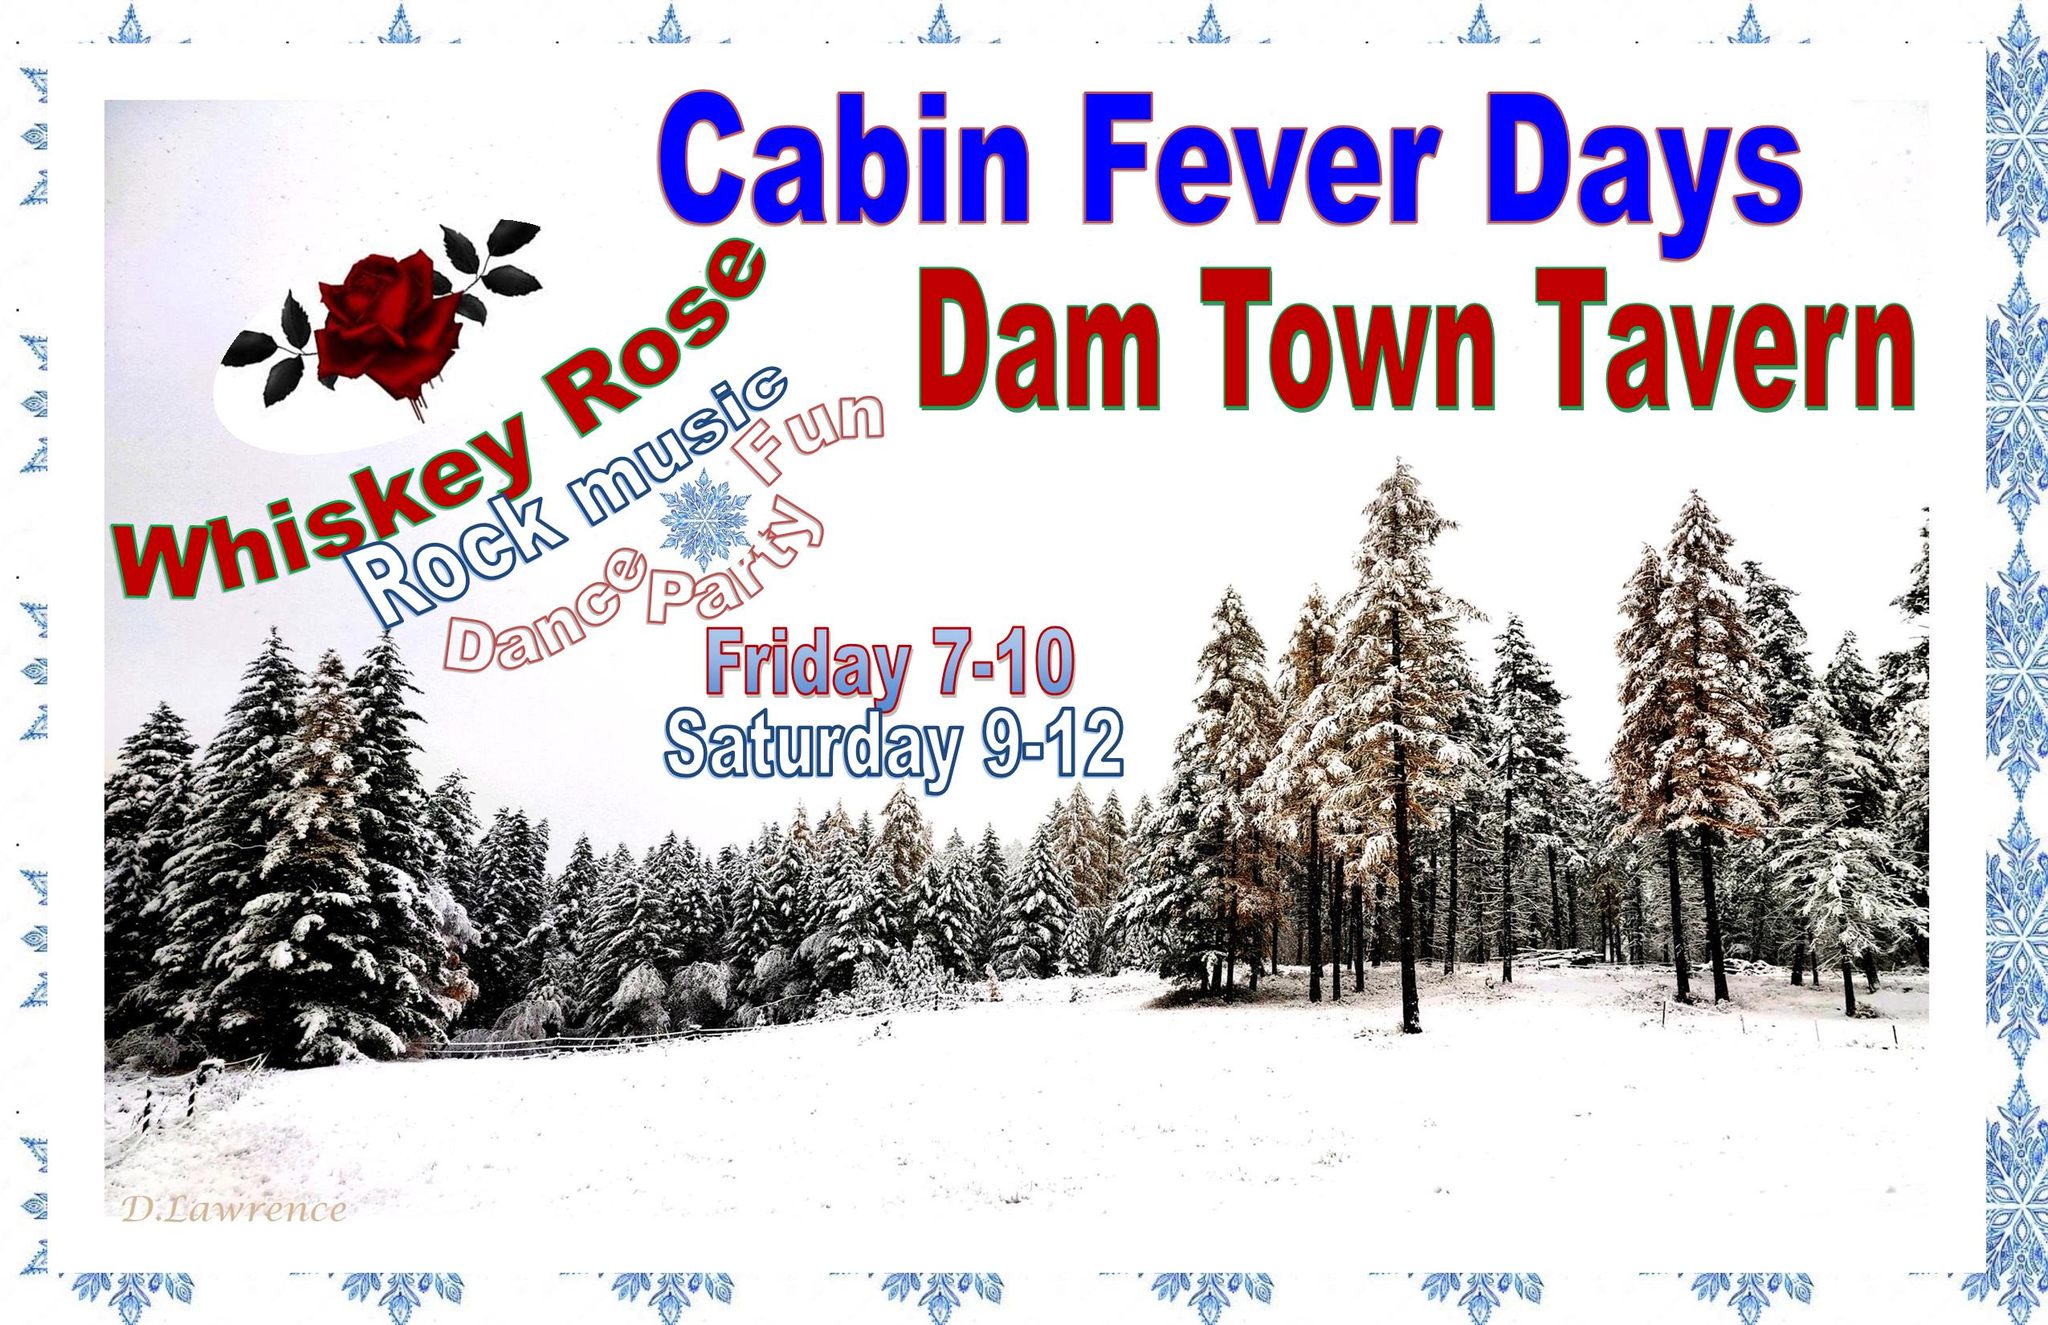 Cabin Fever Days with Whiskey Rose at Dam Town Tavern